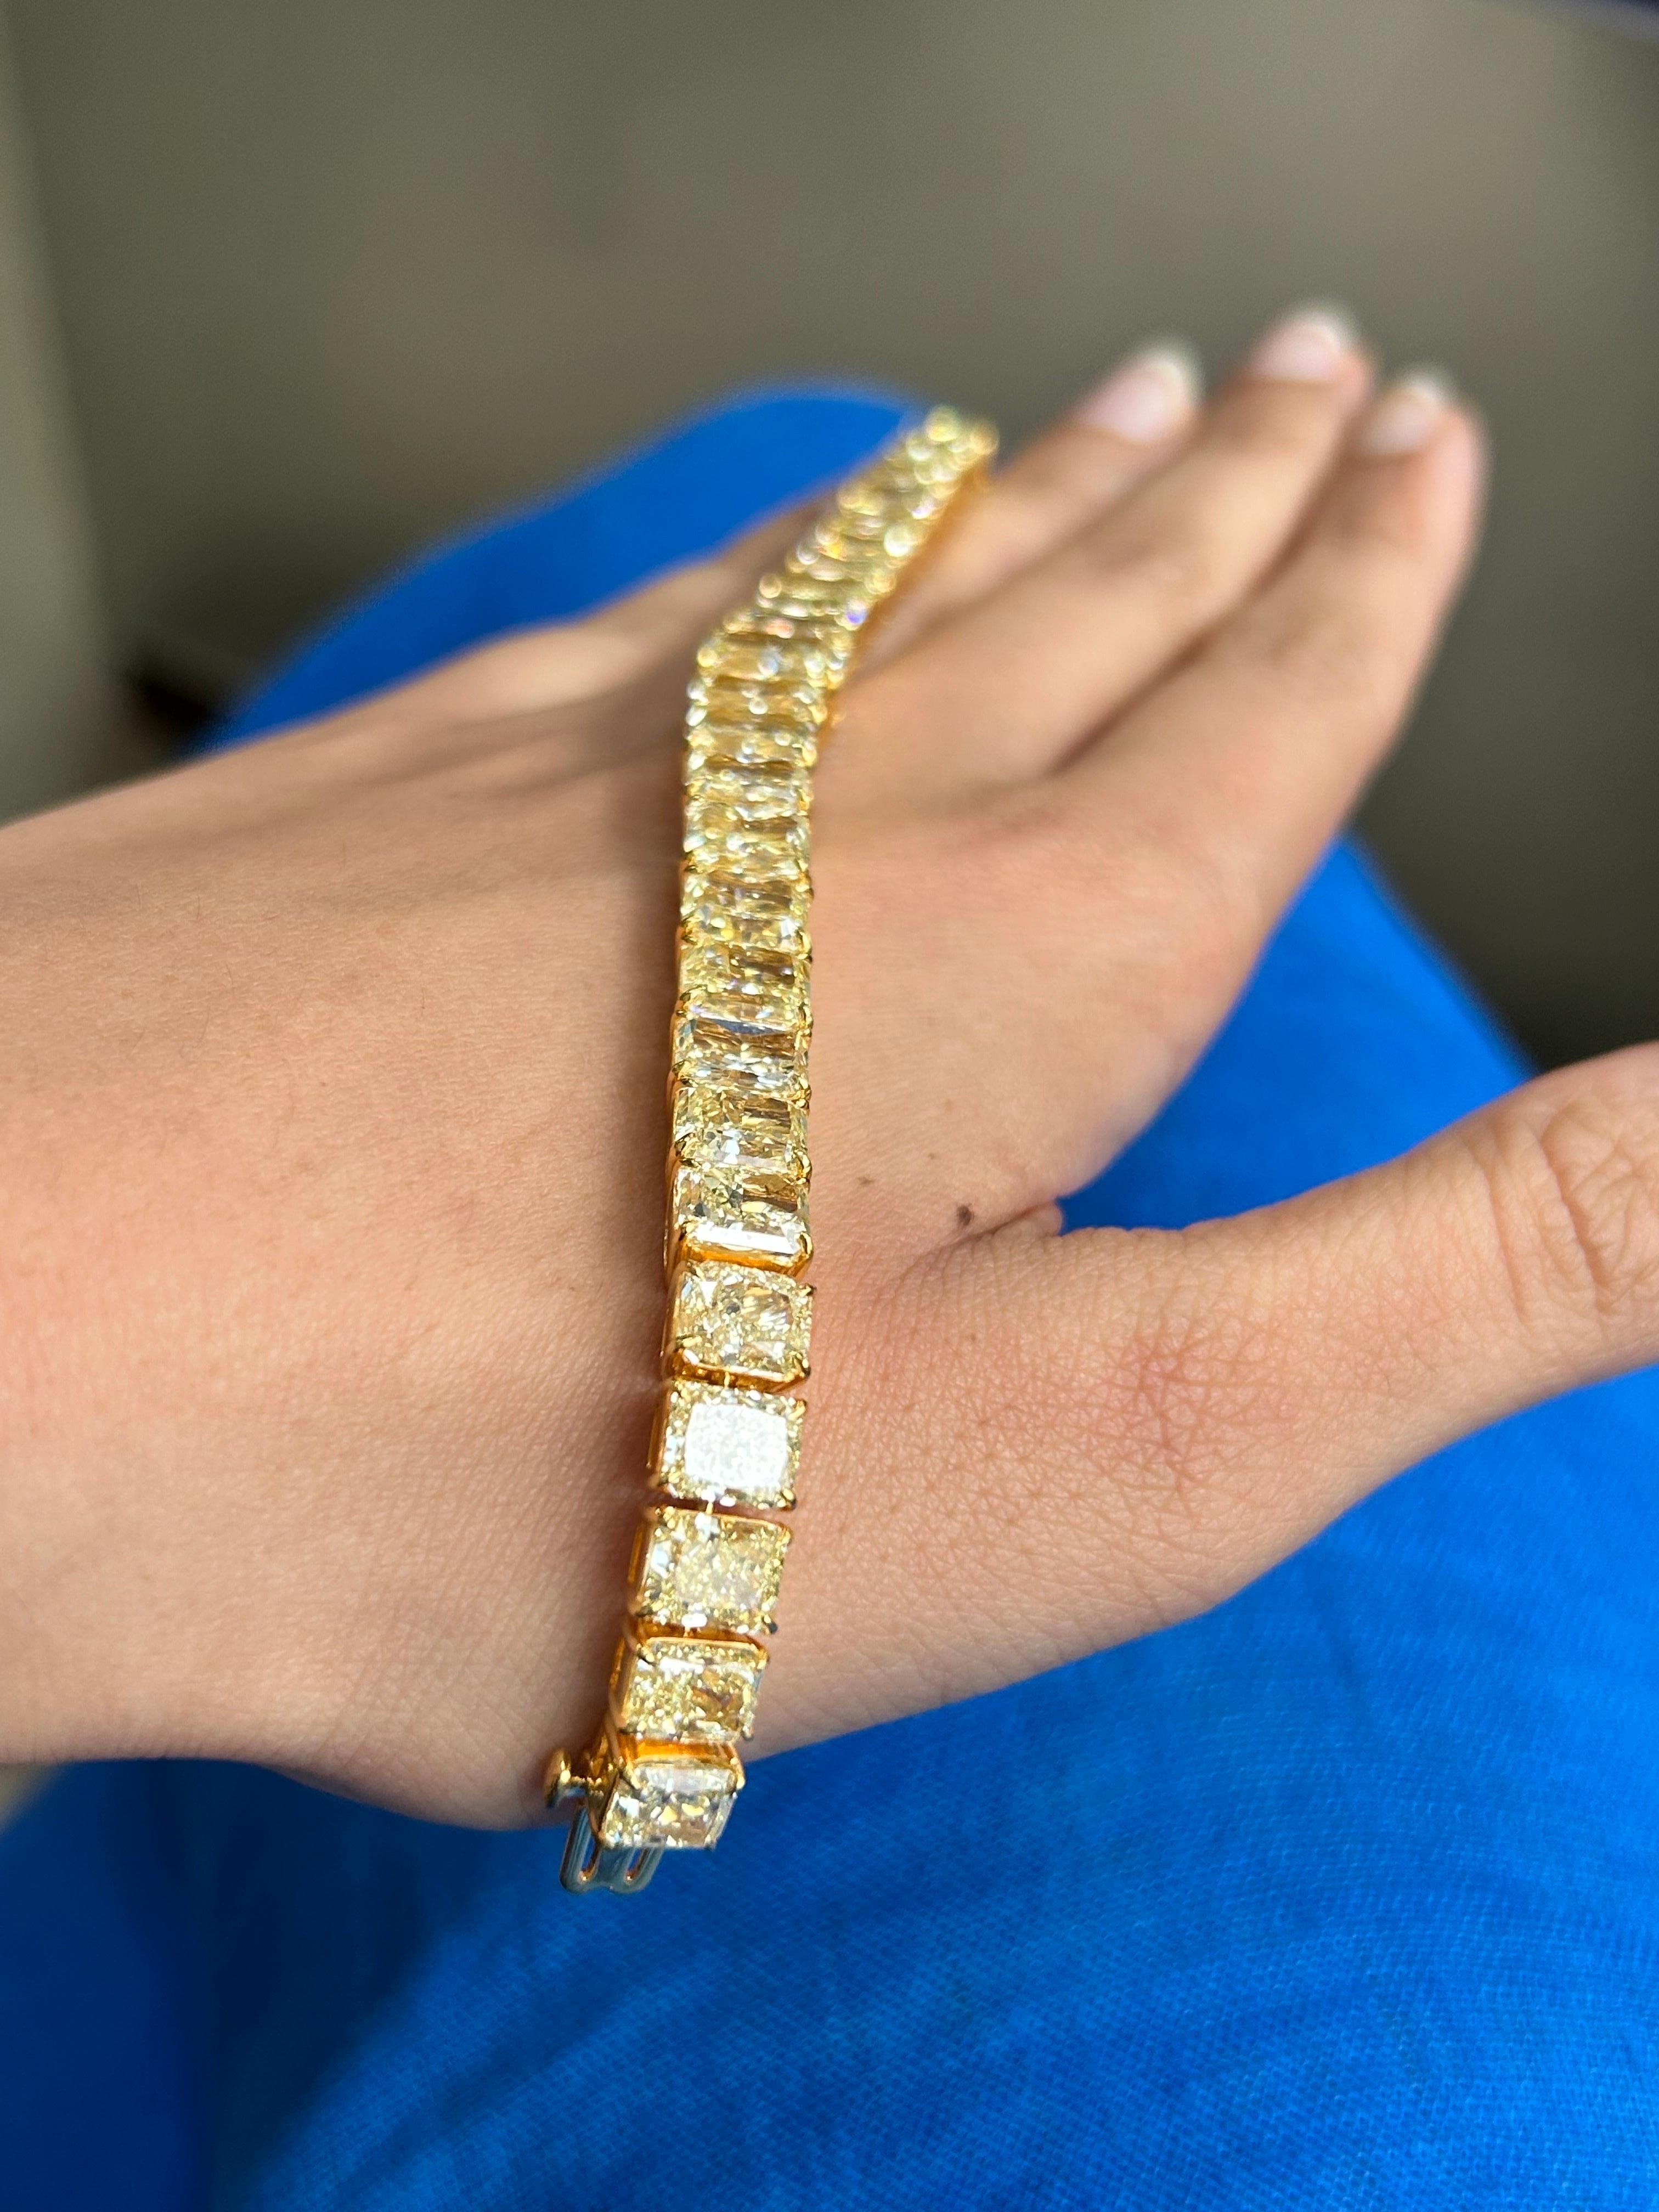 A one of a kind radiant cut Yellow Diamond bracelet, set in solid 18K Yellow Gold. There are a total of 29 pieces in this bracelet, all GIA certified - WX/YZ - fancy light yellow color, IF-VS1 clarity. The stones range from 1 to 3.73 carats each. 12